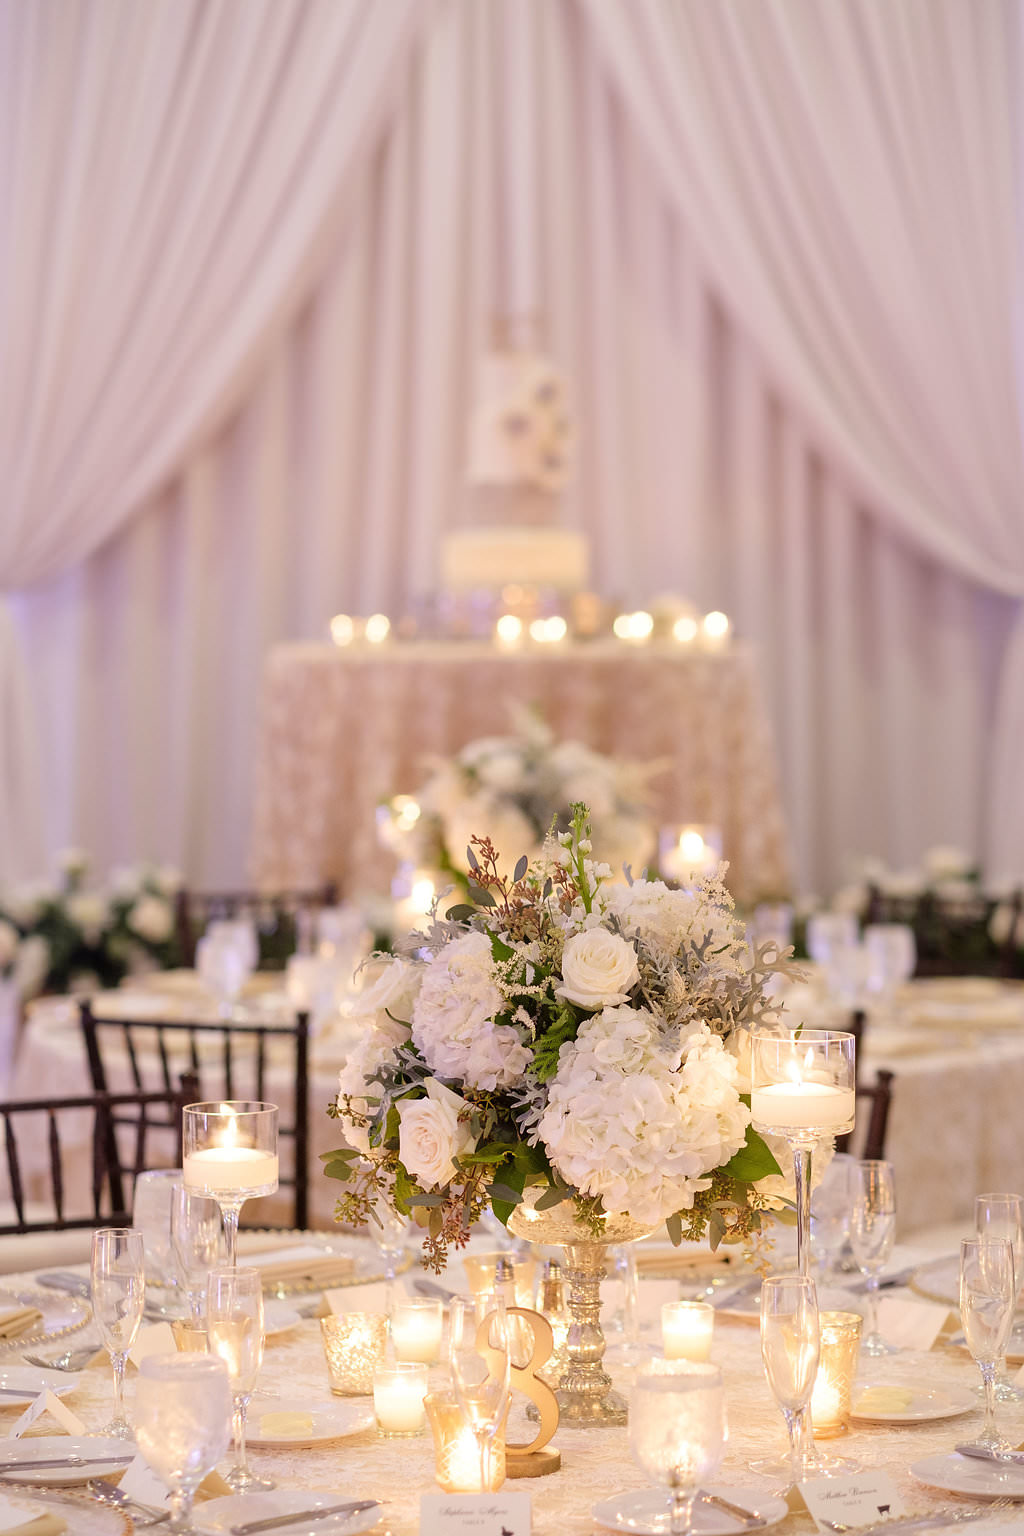 Hotel Ballroom Gold and White Wedding Reception Round Table Decor with Short White Hydrangea and greenery Centerpiece with votive candles and blush linens, and white draping | St Pete Historic Wedding Venue The Vinoy